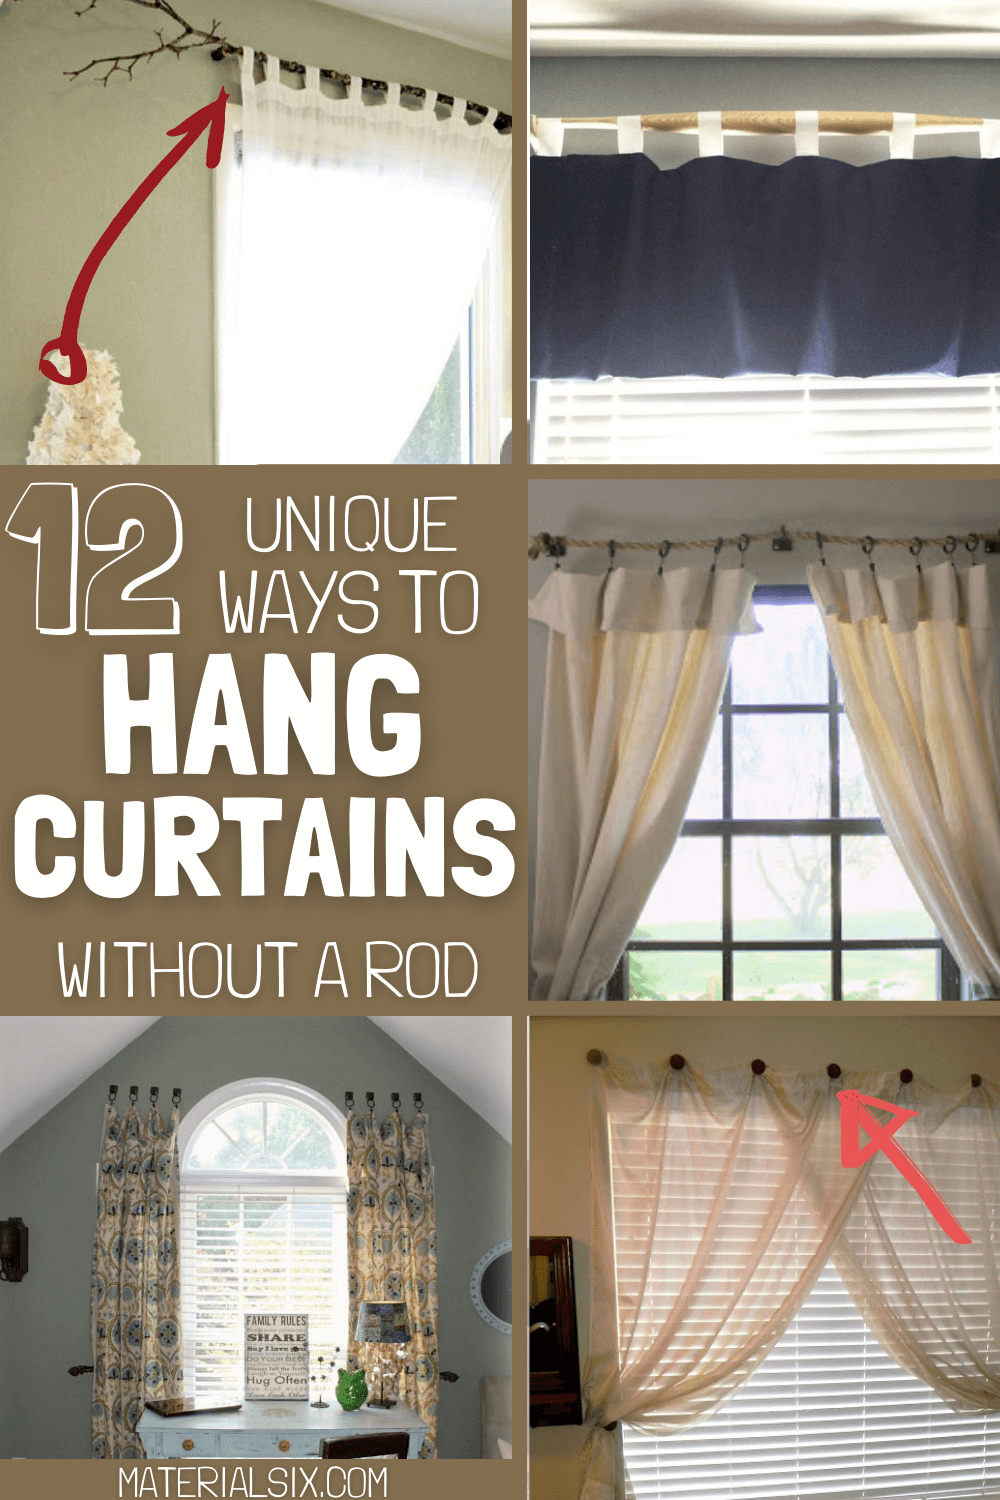 How to Hang Curtains Without a Rod